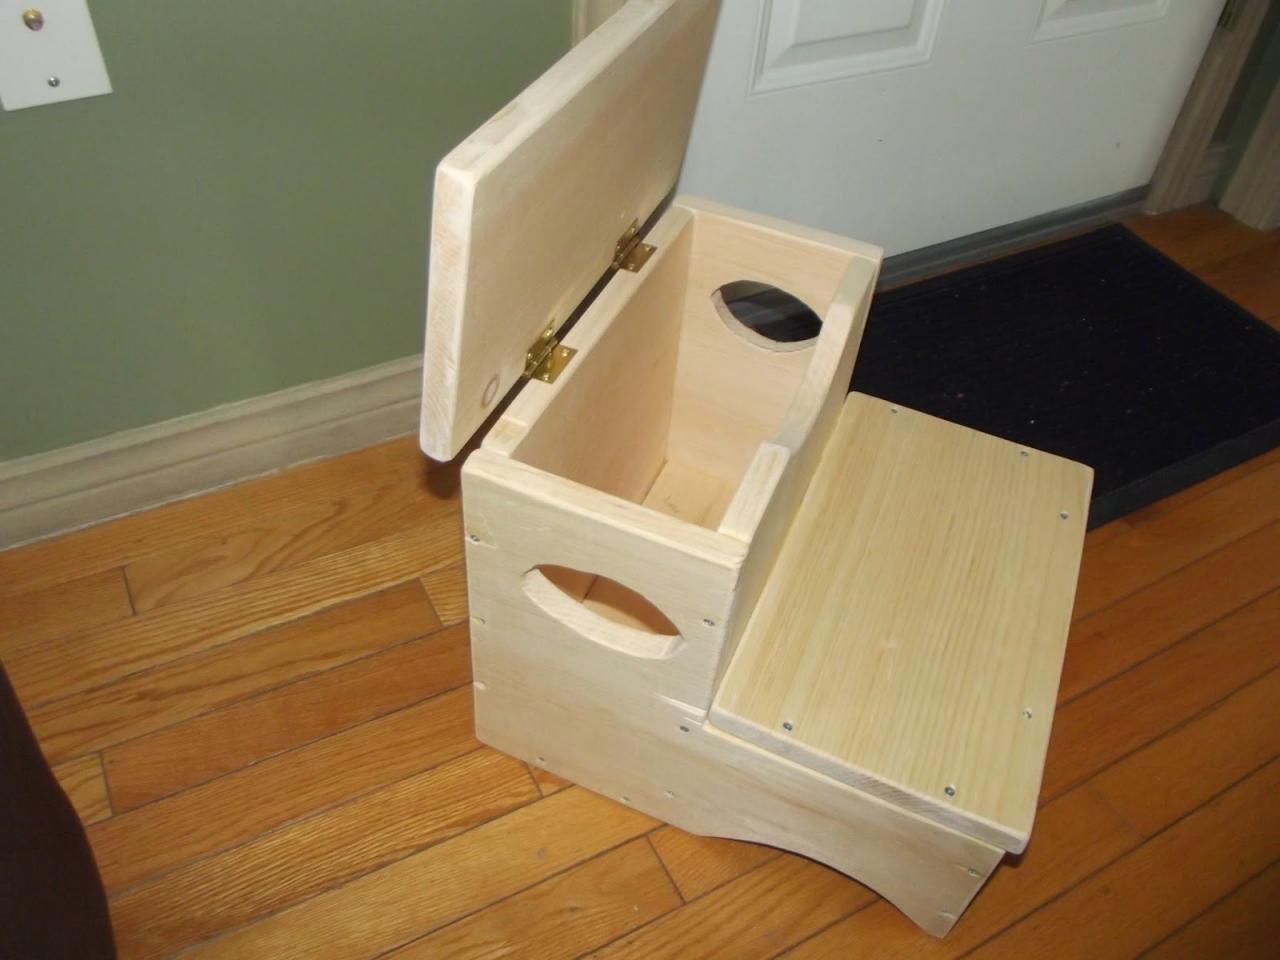 This is a good idea. A storage step stool. Not terribly Geeky on the